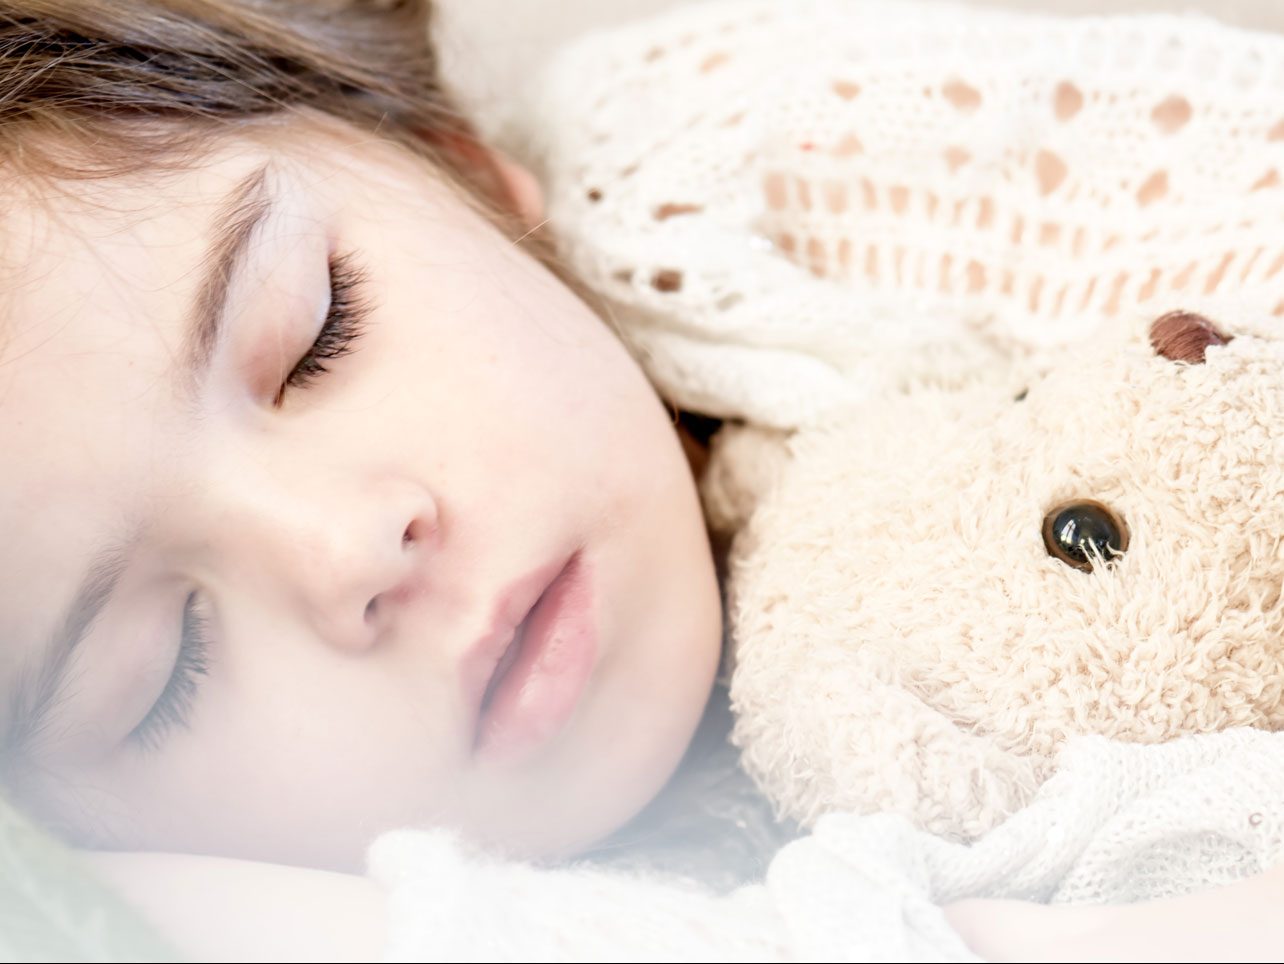 Child sleeping with a stuffed animal in bedroom